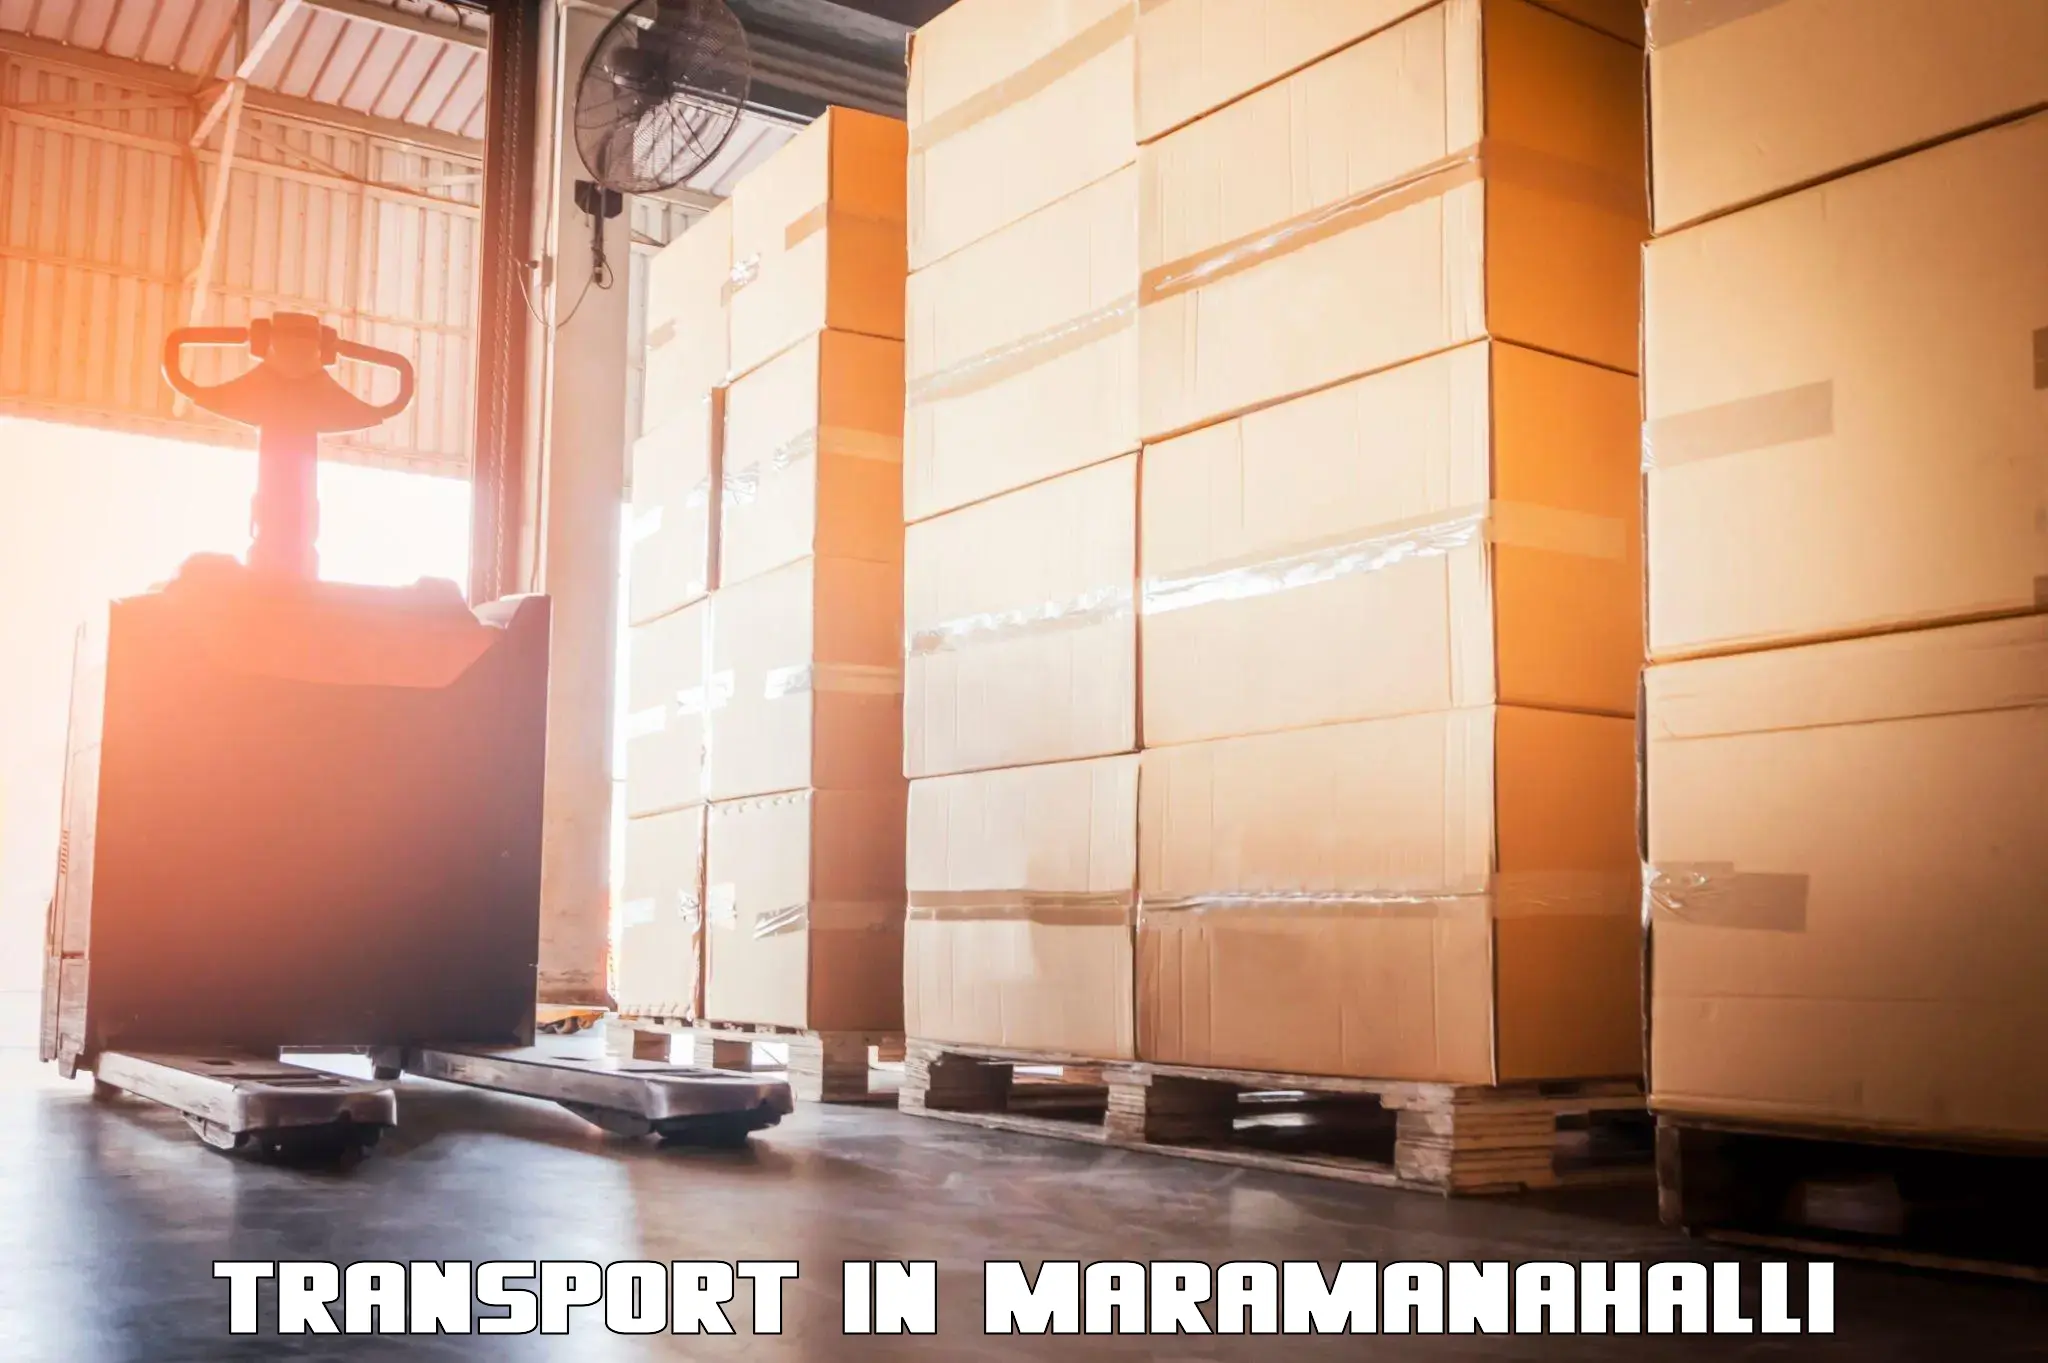 Vehicle transport services in Maramanahalli